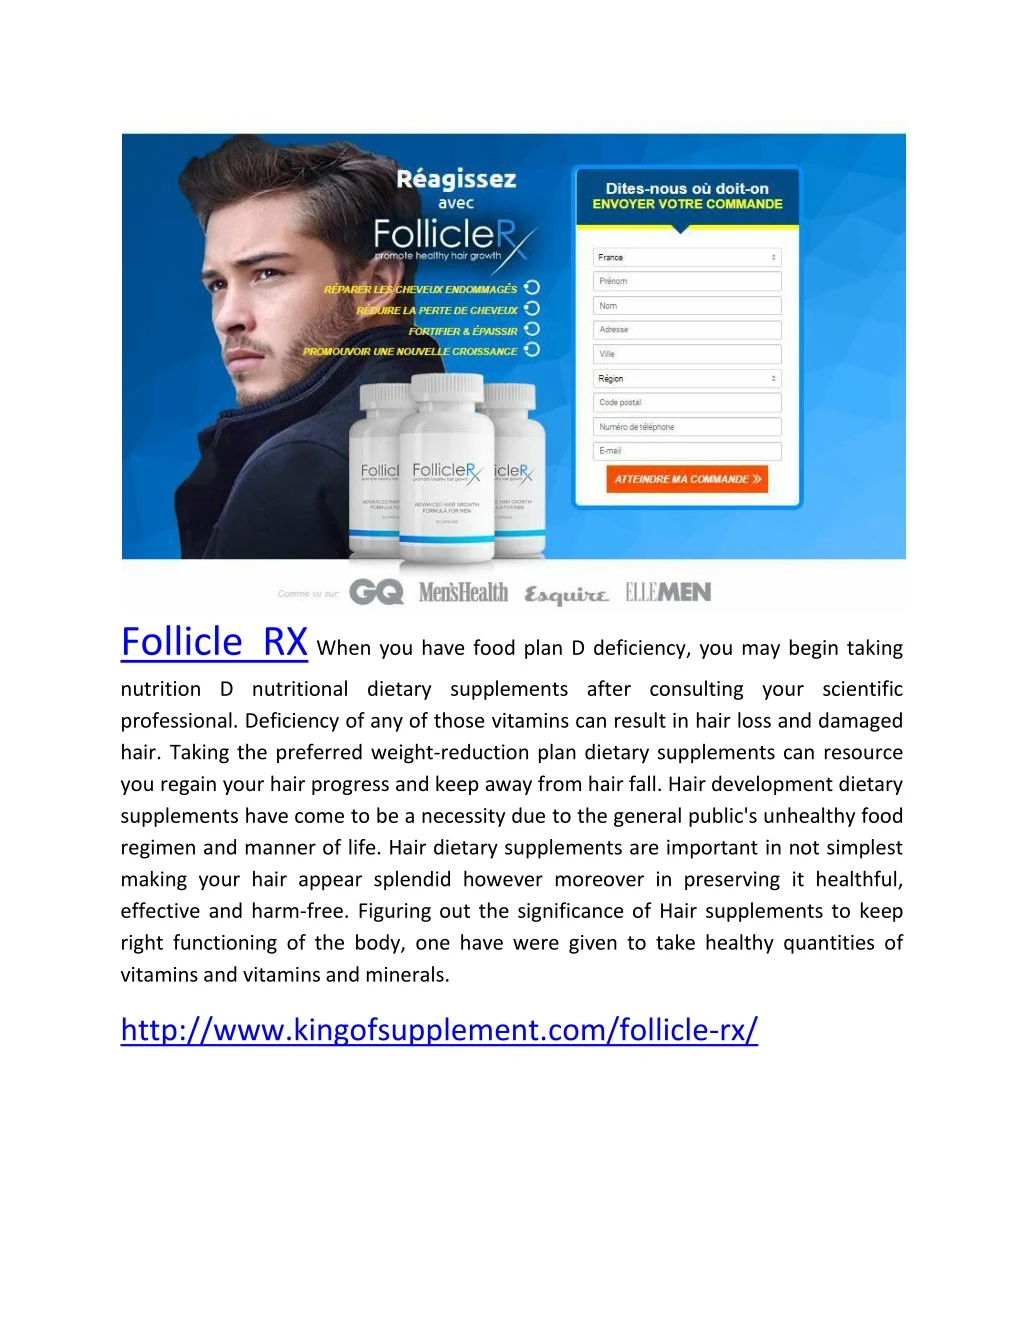 follicle rx when you have food plan d deficiency